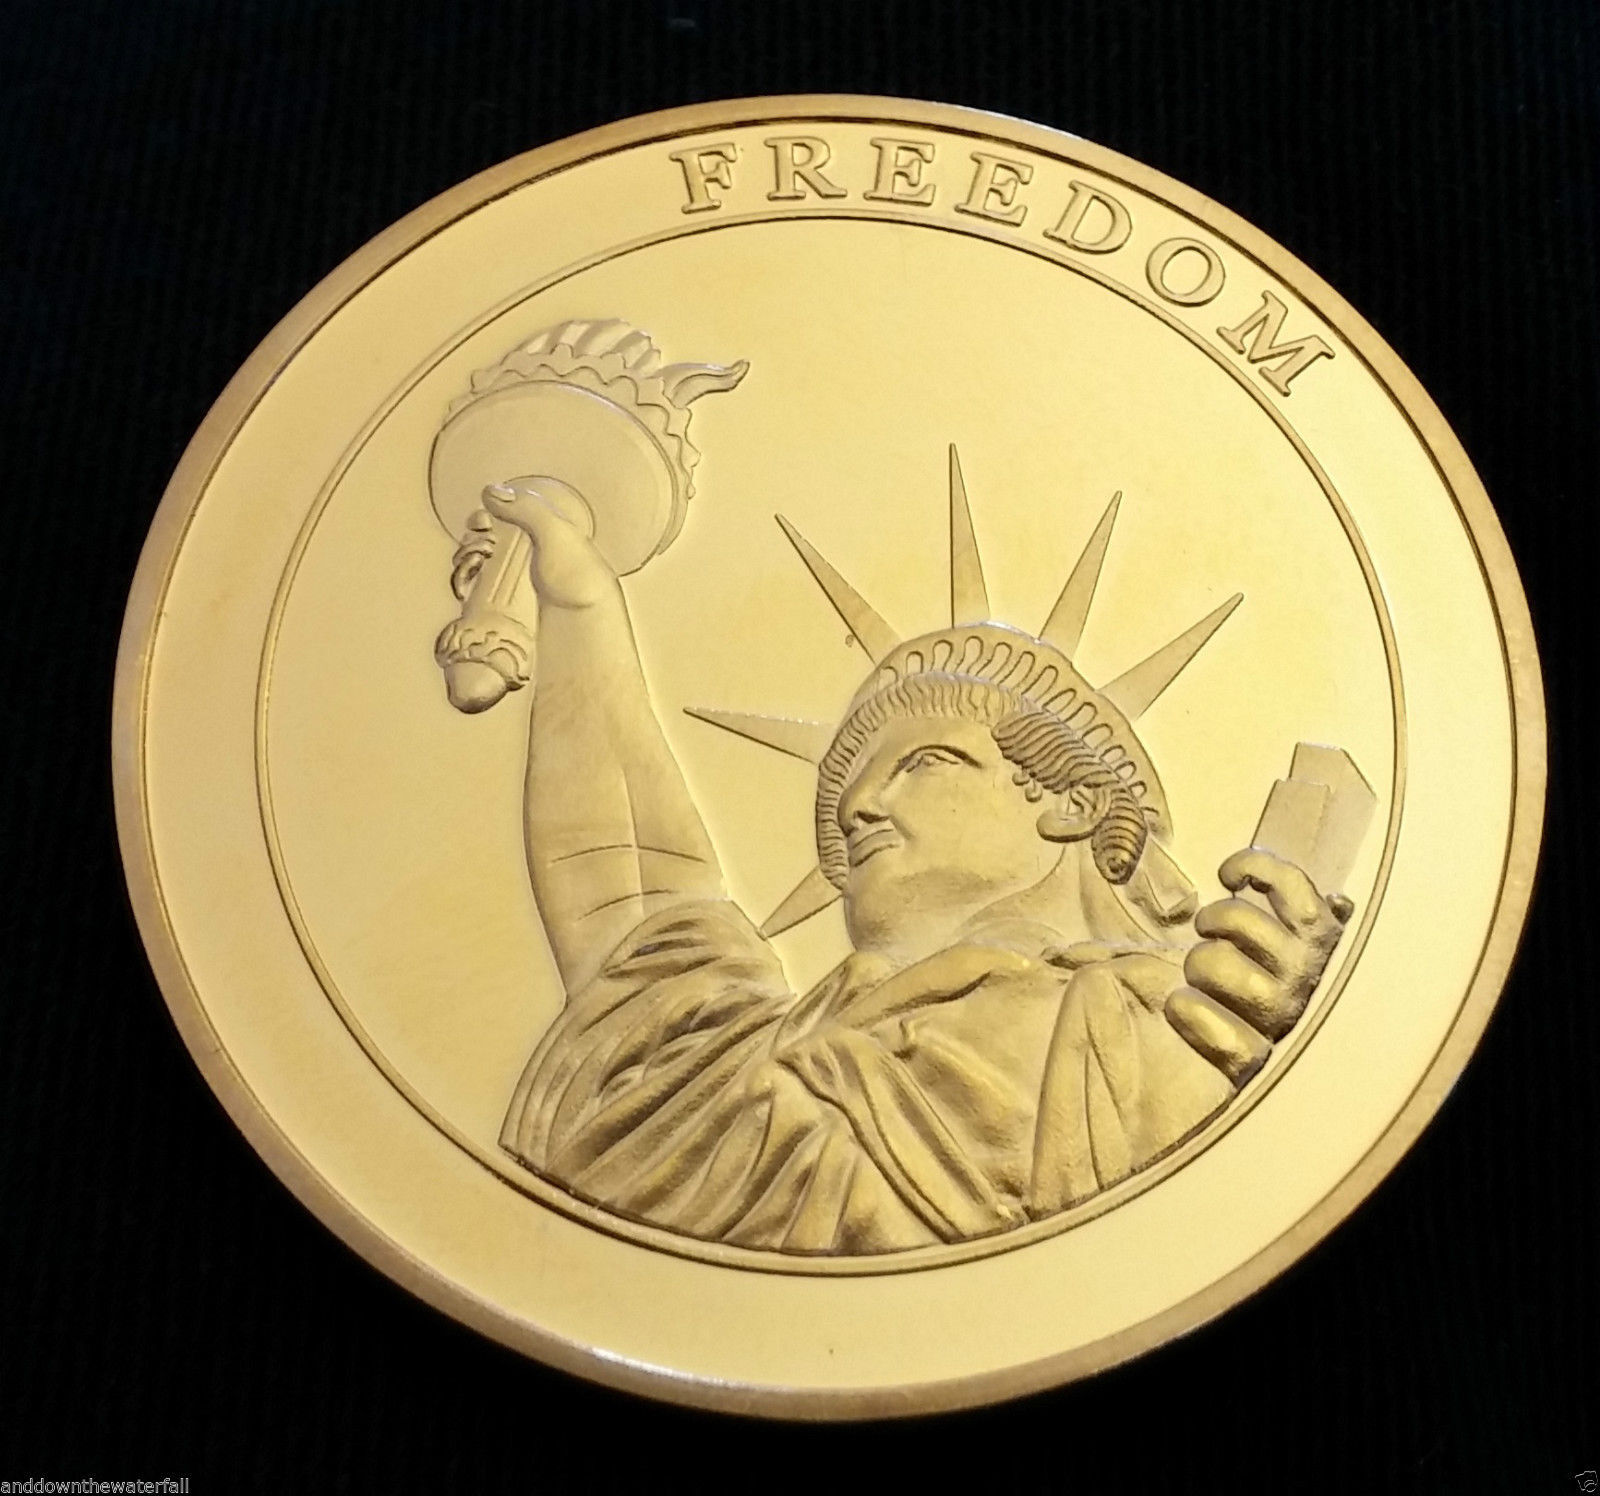 9/11 Statue of Liberty Gold Coin New York City United States of America Man USA